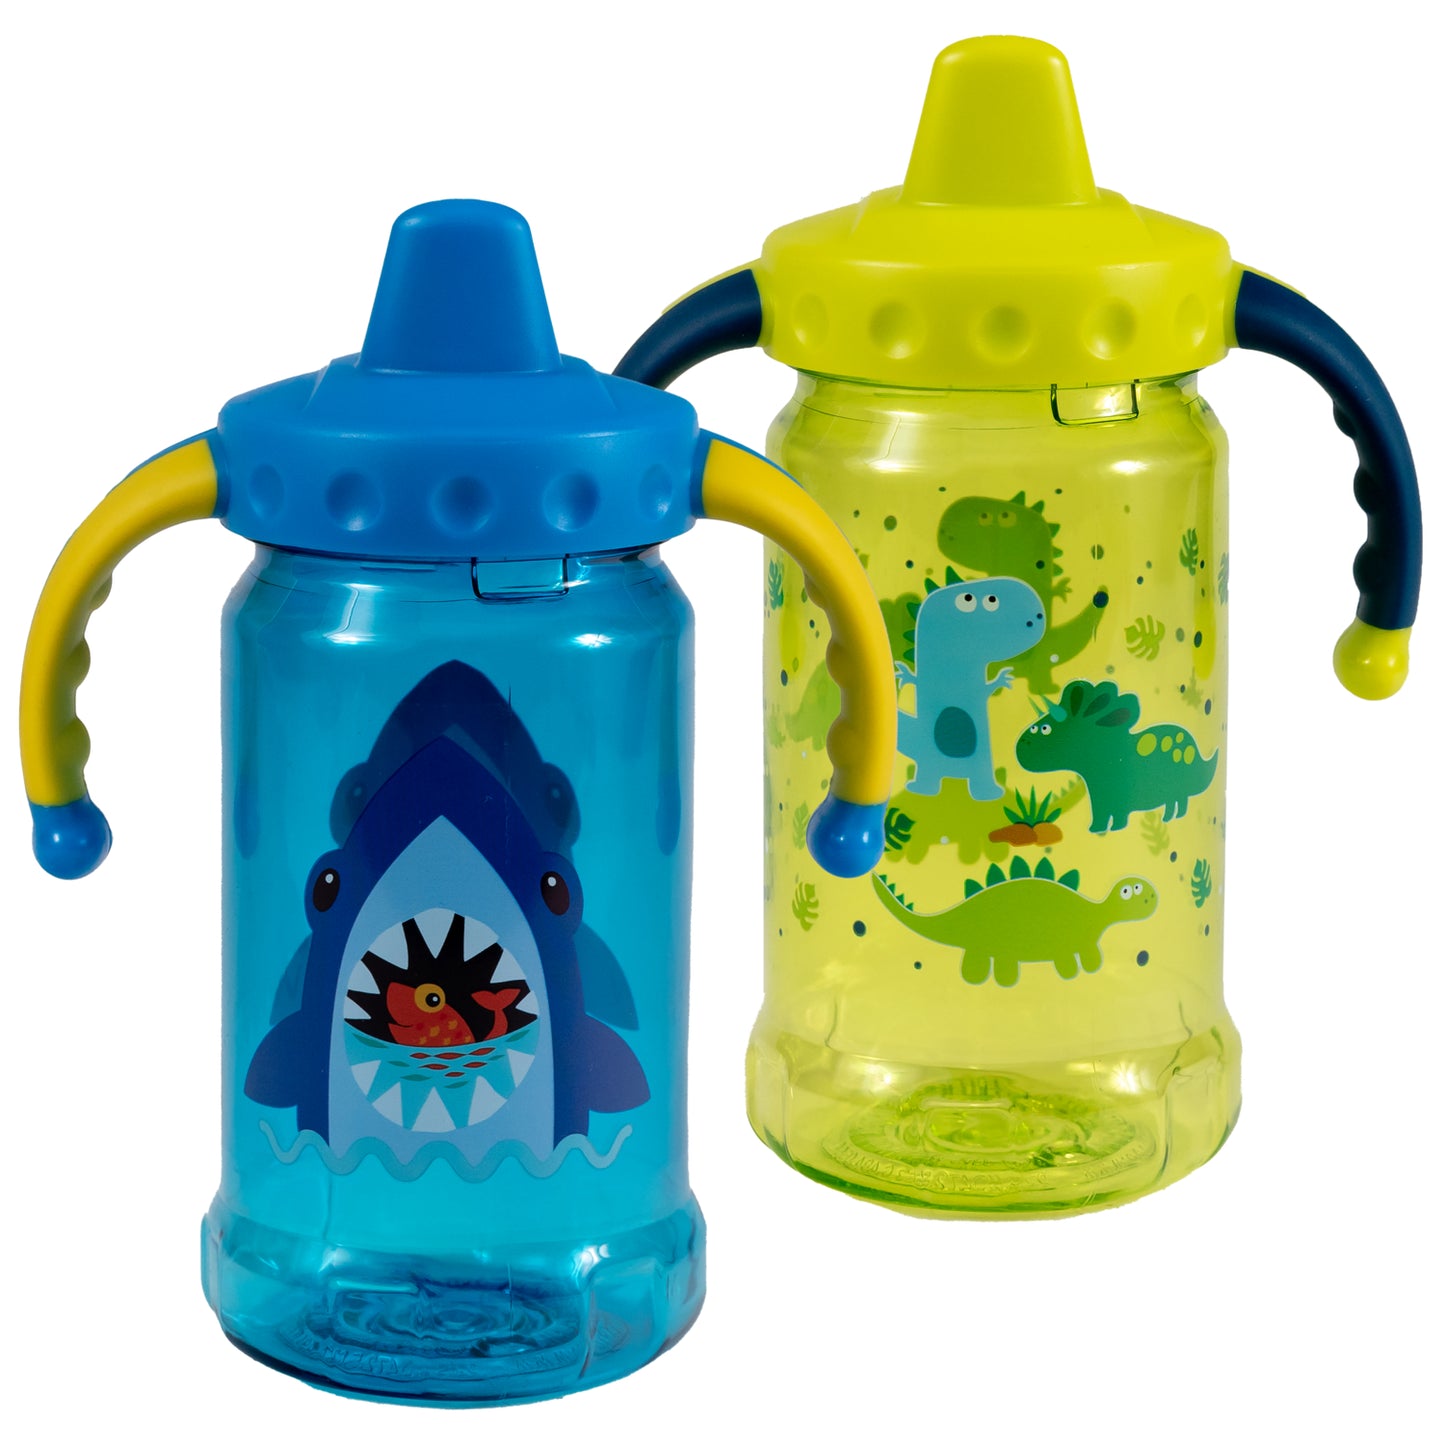 COOL GEAR 2-Pack 12 oz Gripper Sipper Cups For Kids & Toddlers - Dishwasher Safe, Spillproof, Leakproof Waterbottle With Handles For Babies